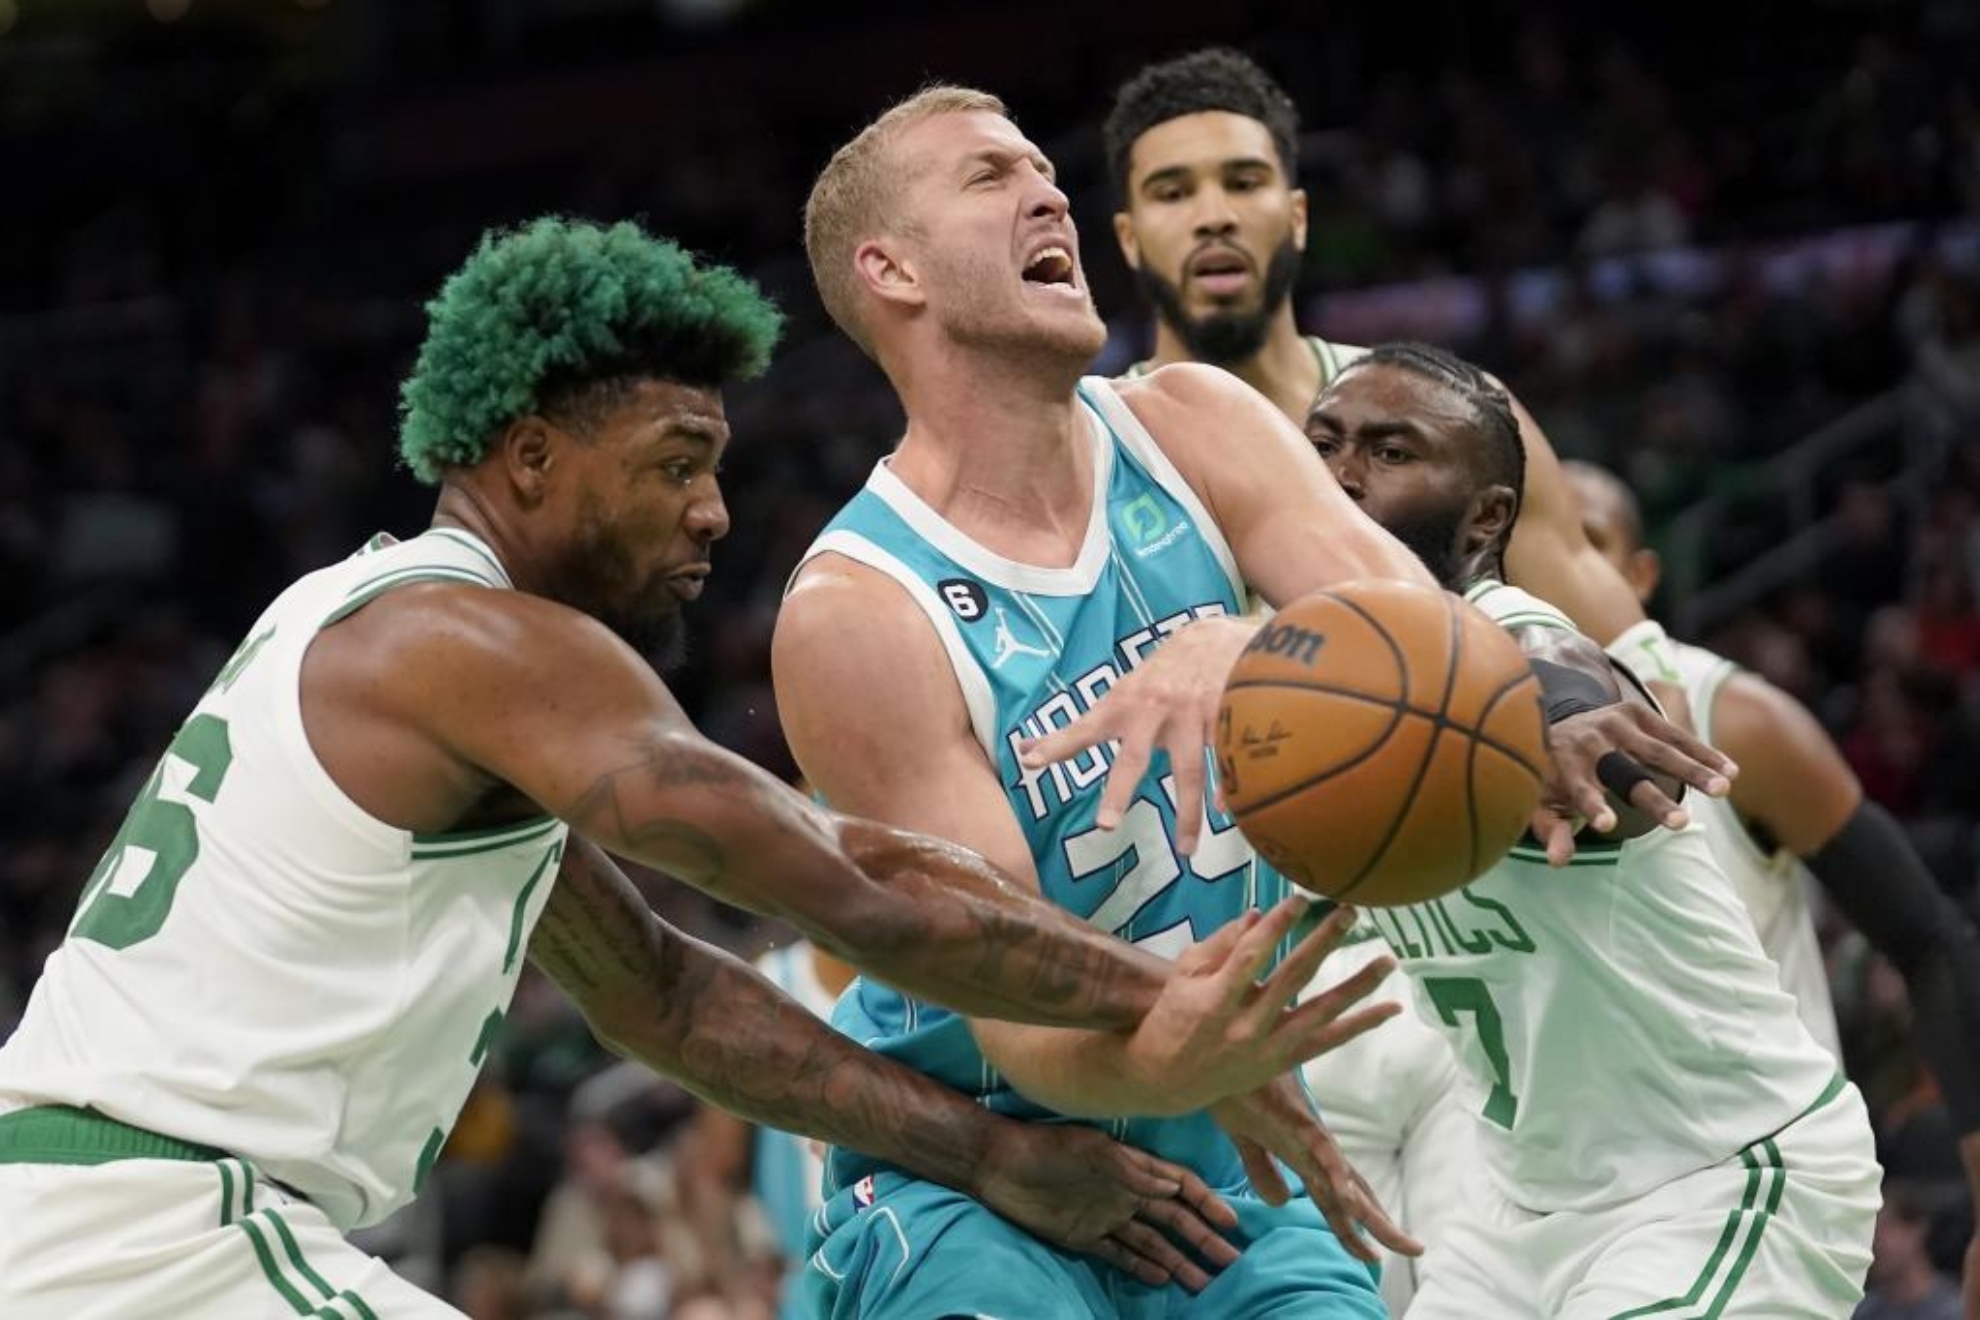 The NBA's worst free-throw shooter Mason Plumlee changes his strategy... And he keeps missing!